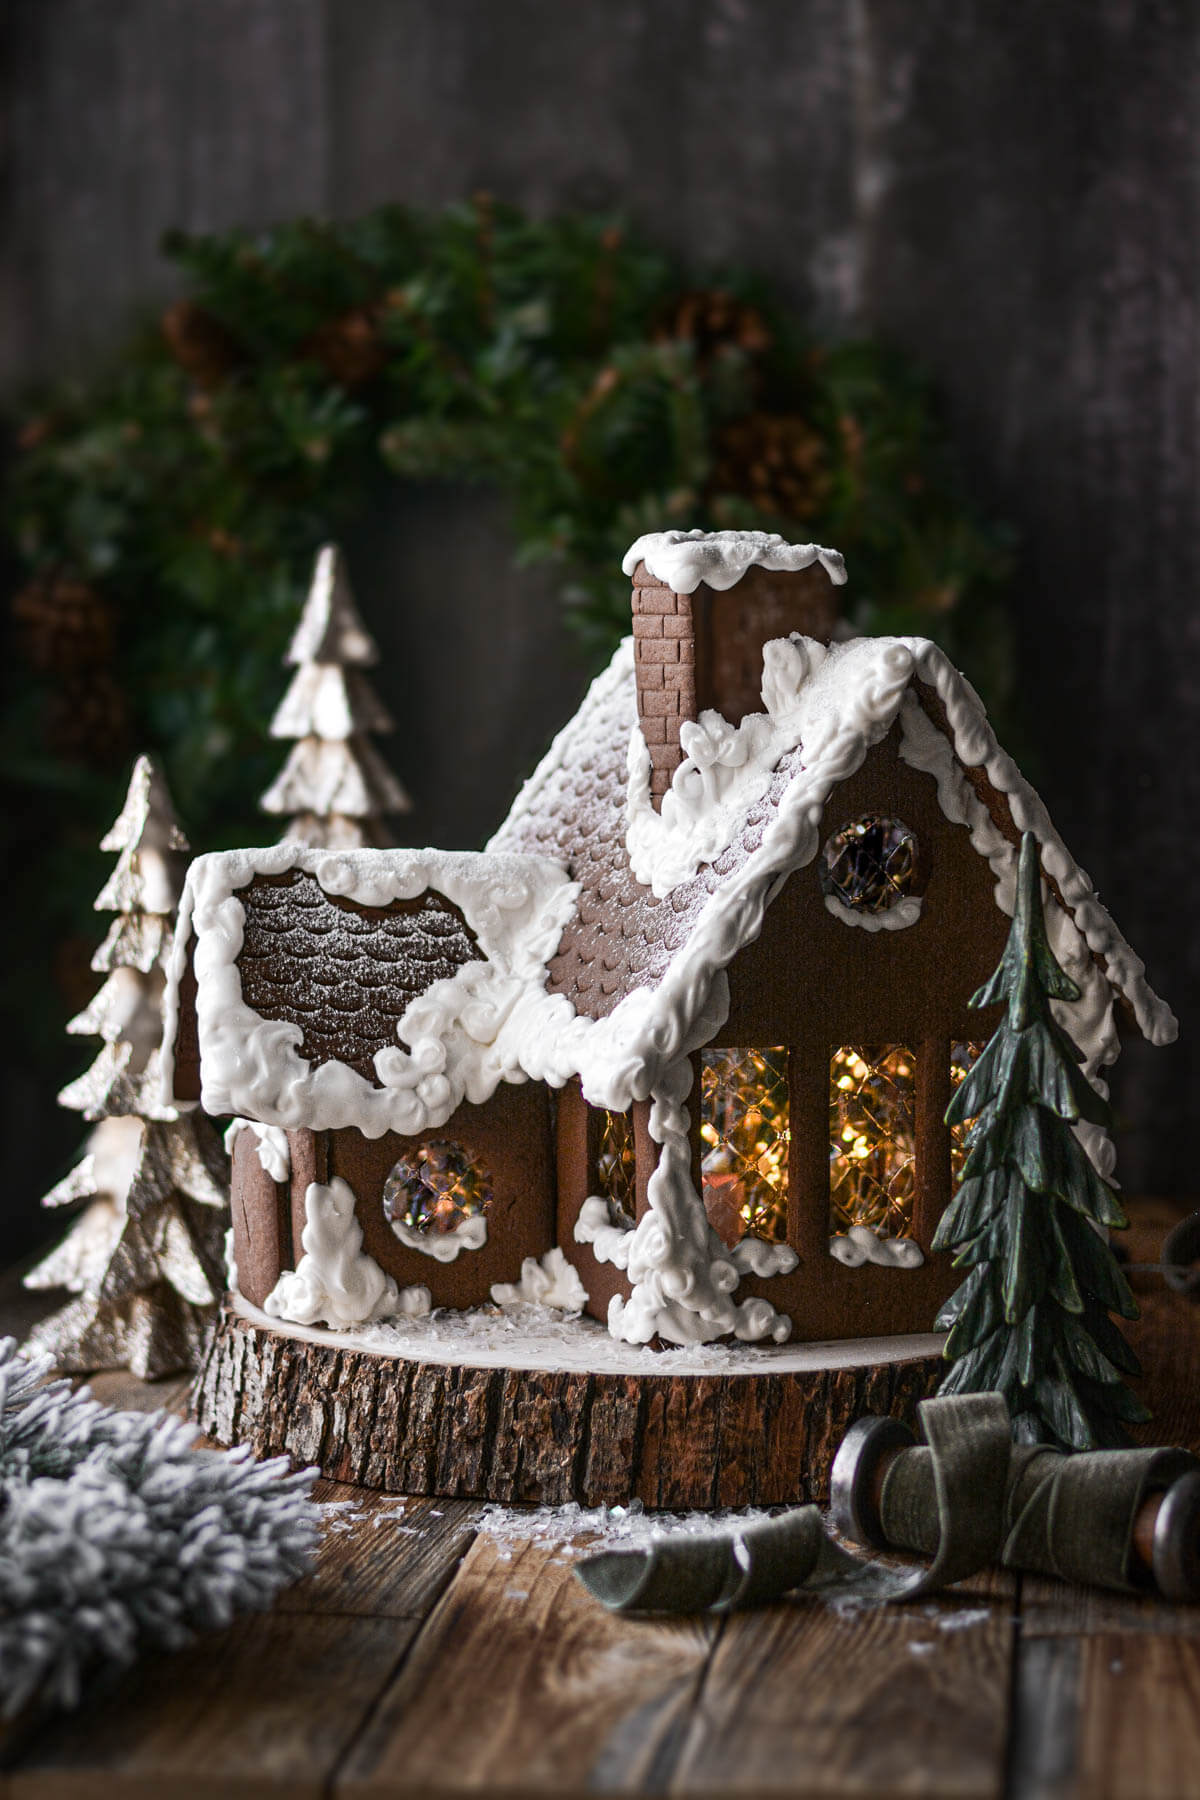 A homemade gingerbread house with icing snow, sitting on a wood slice.